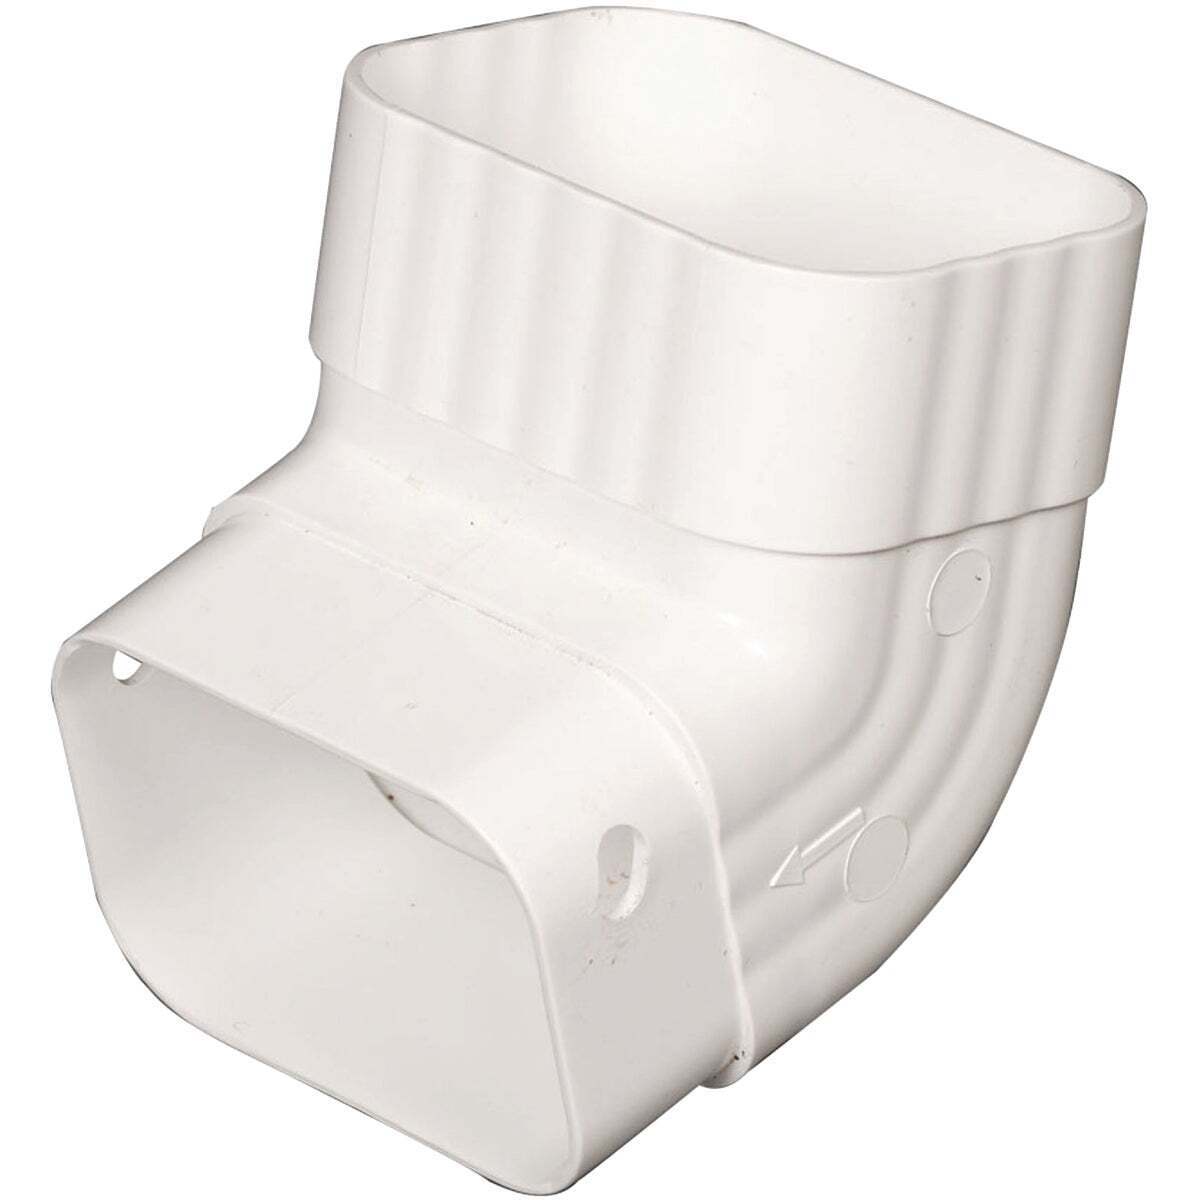 Amerimax 2 In. X 3 In. White Vinyl Front A Elbow M0627 Pack Of 20 Amerimax M0627